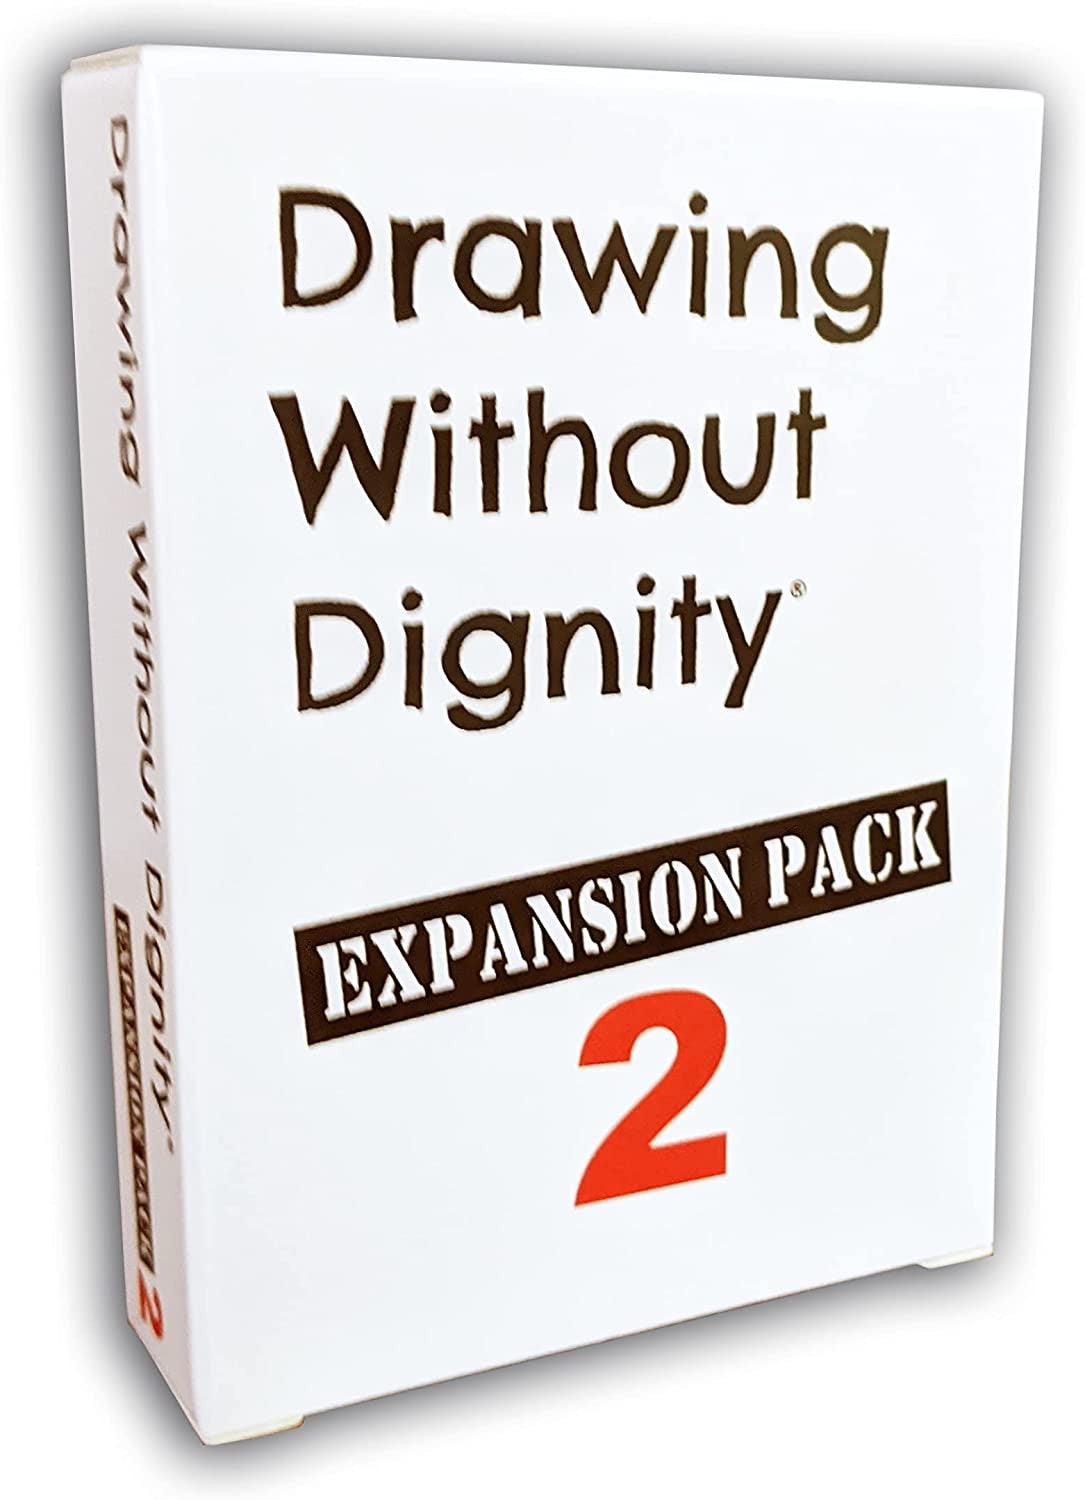 VR-96371 Drawing Without Dignity Expansion Pack 2 - TwoPointOh Games - Titan Pop Culture